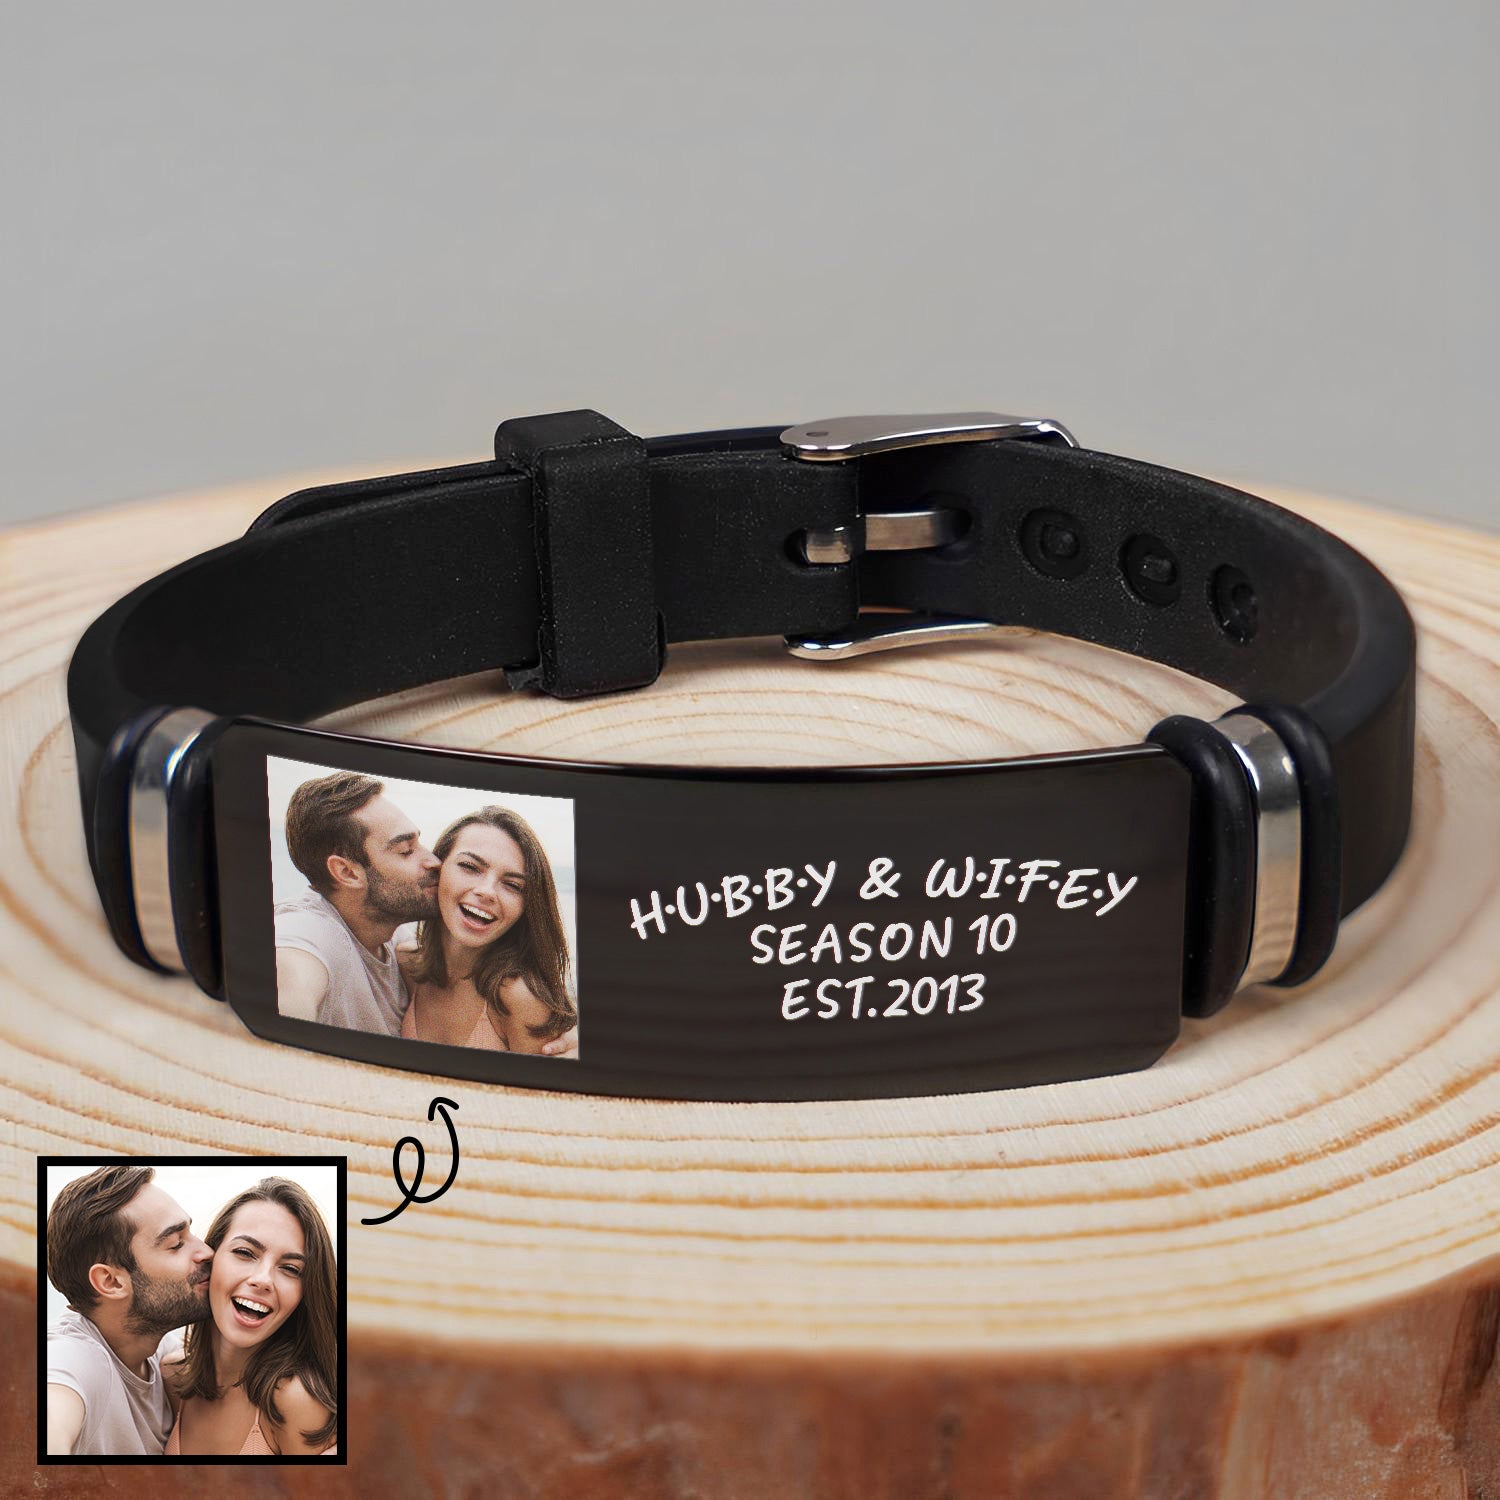 Custom Photo Hubby And Wifey - Birthday, Anniversary Gift For Spouse, Husband, Wife, Couple - Personalized Engraved Bracelet